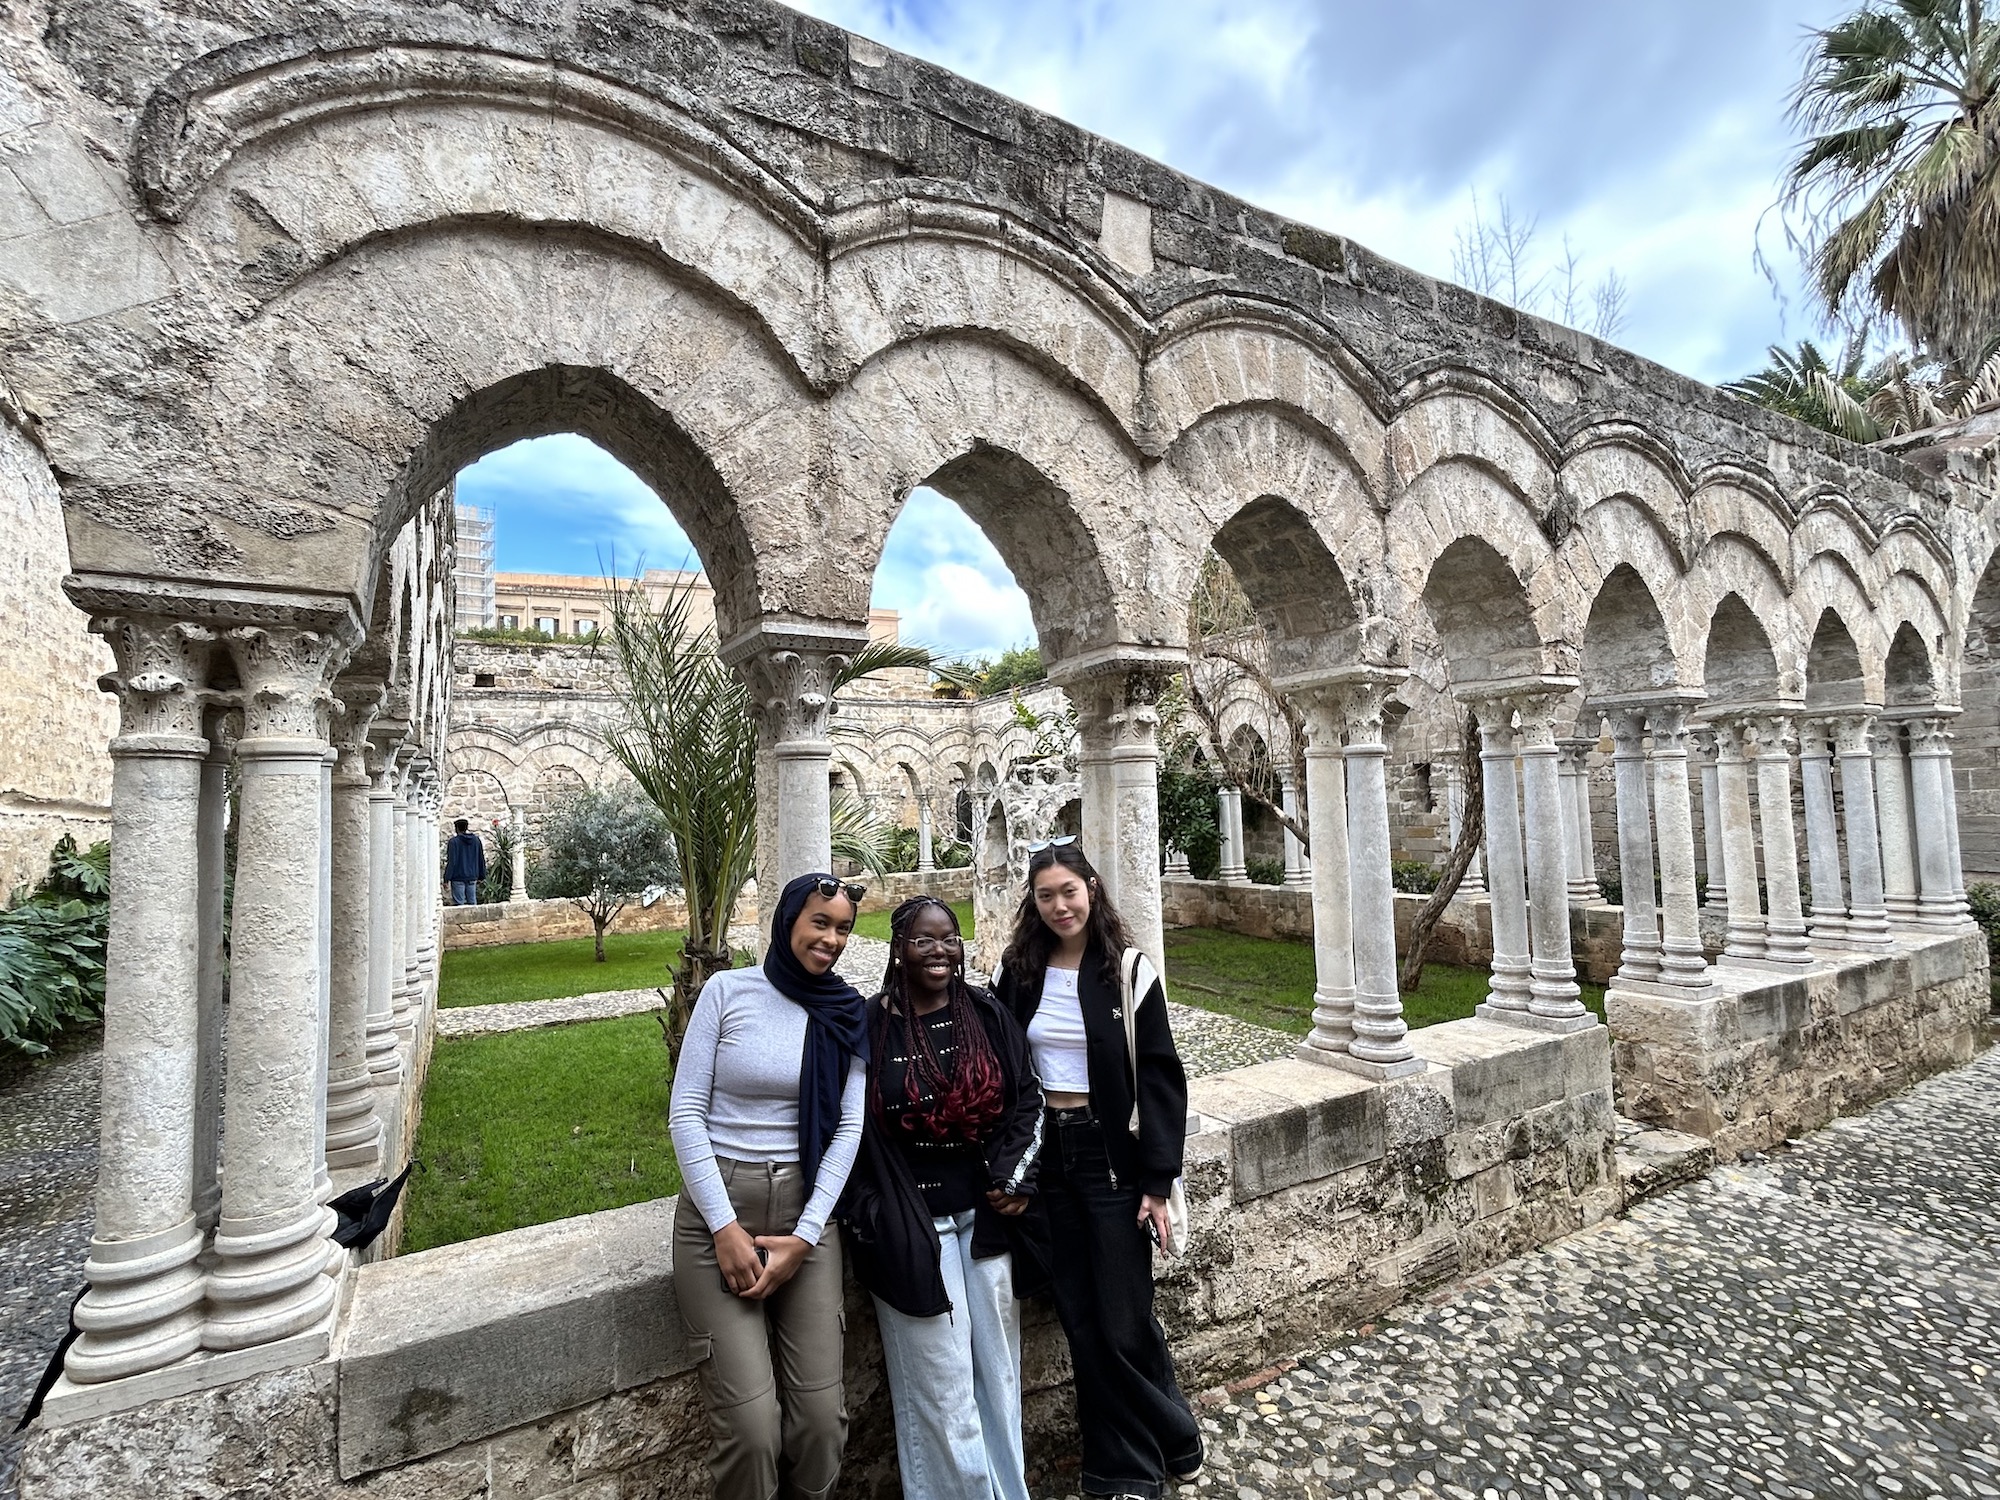 Three students pose in front of arches at the cloister of San Giovanni degli Eremiti, a historic monastery in Palermo.